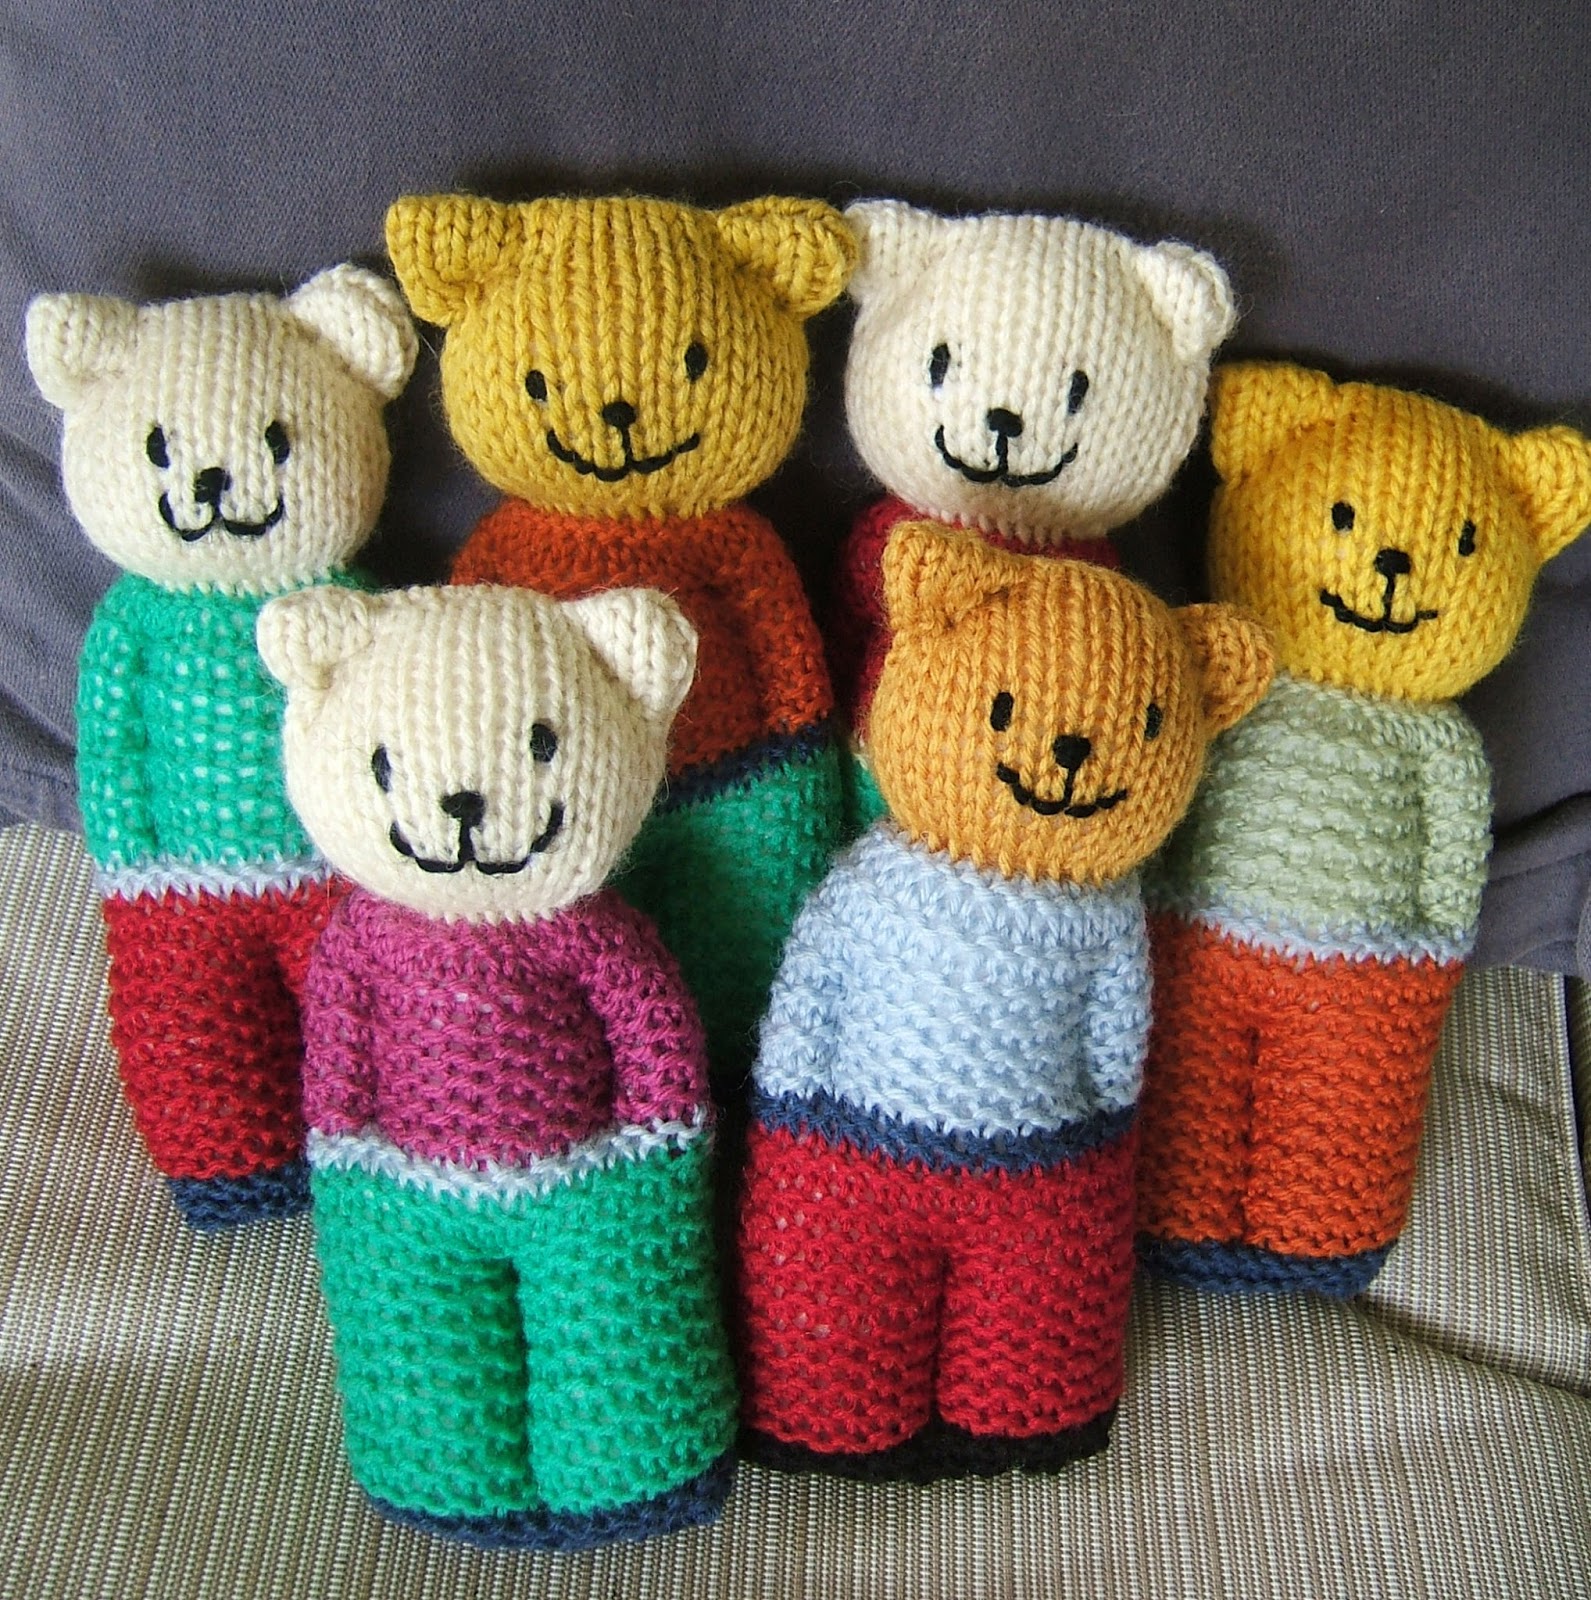 aussie knitting threads Ready Teddy in a square